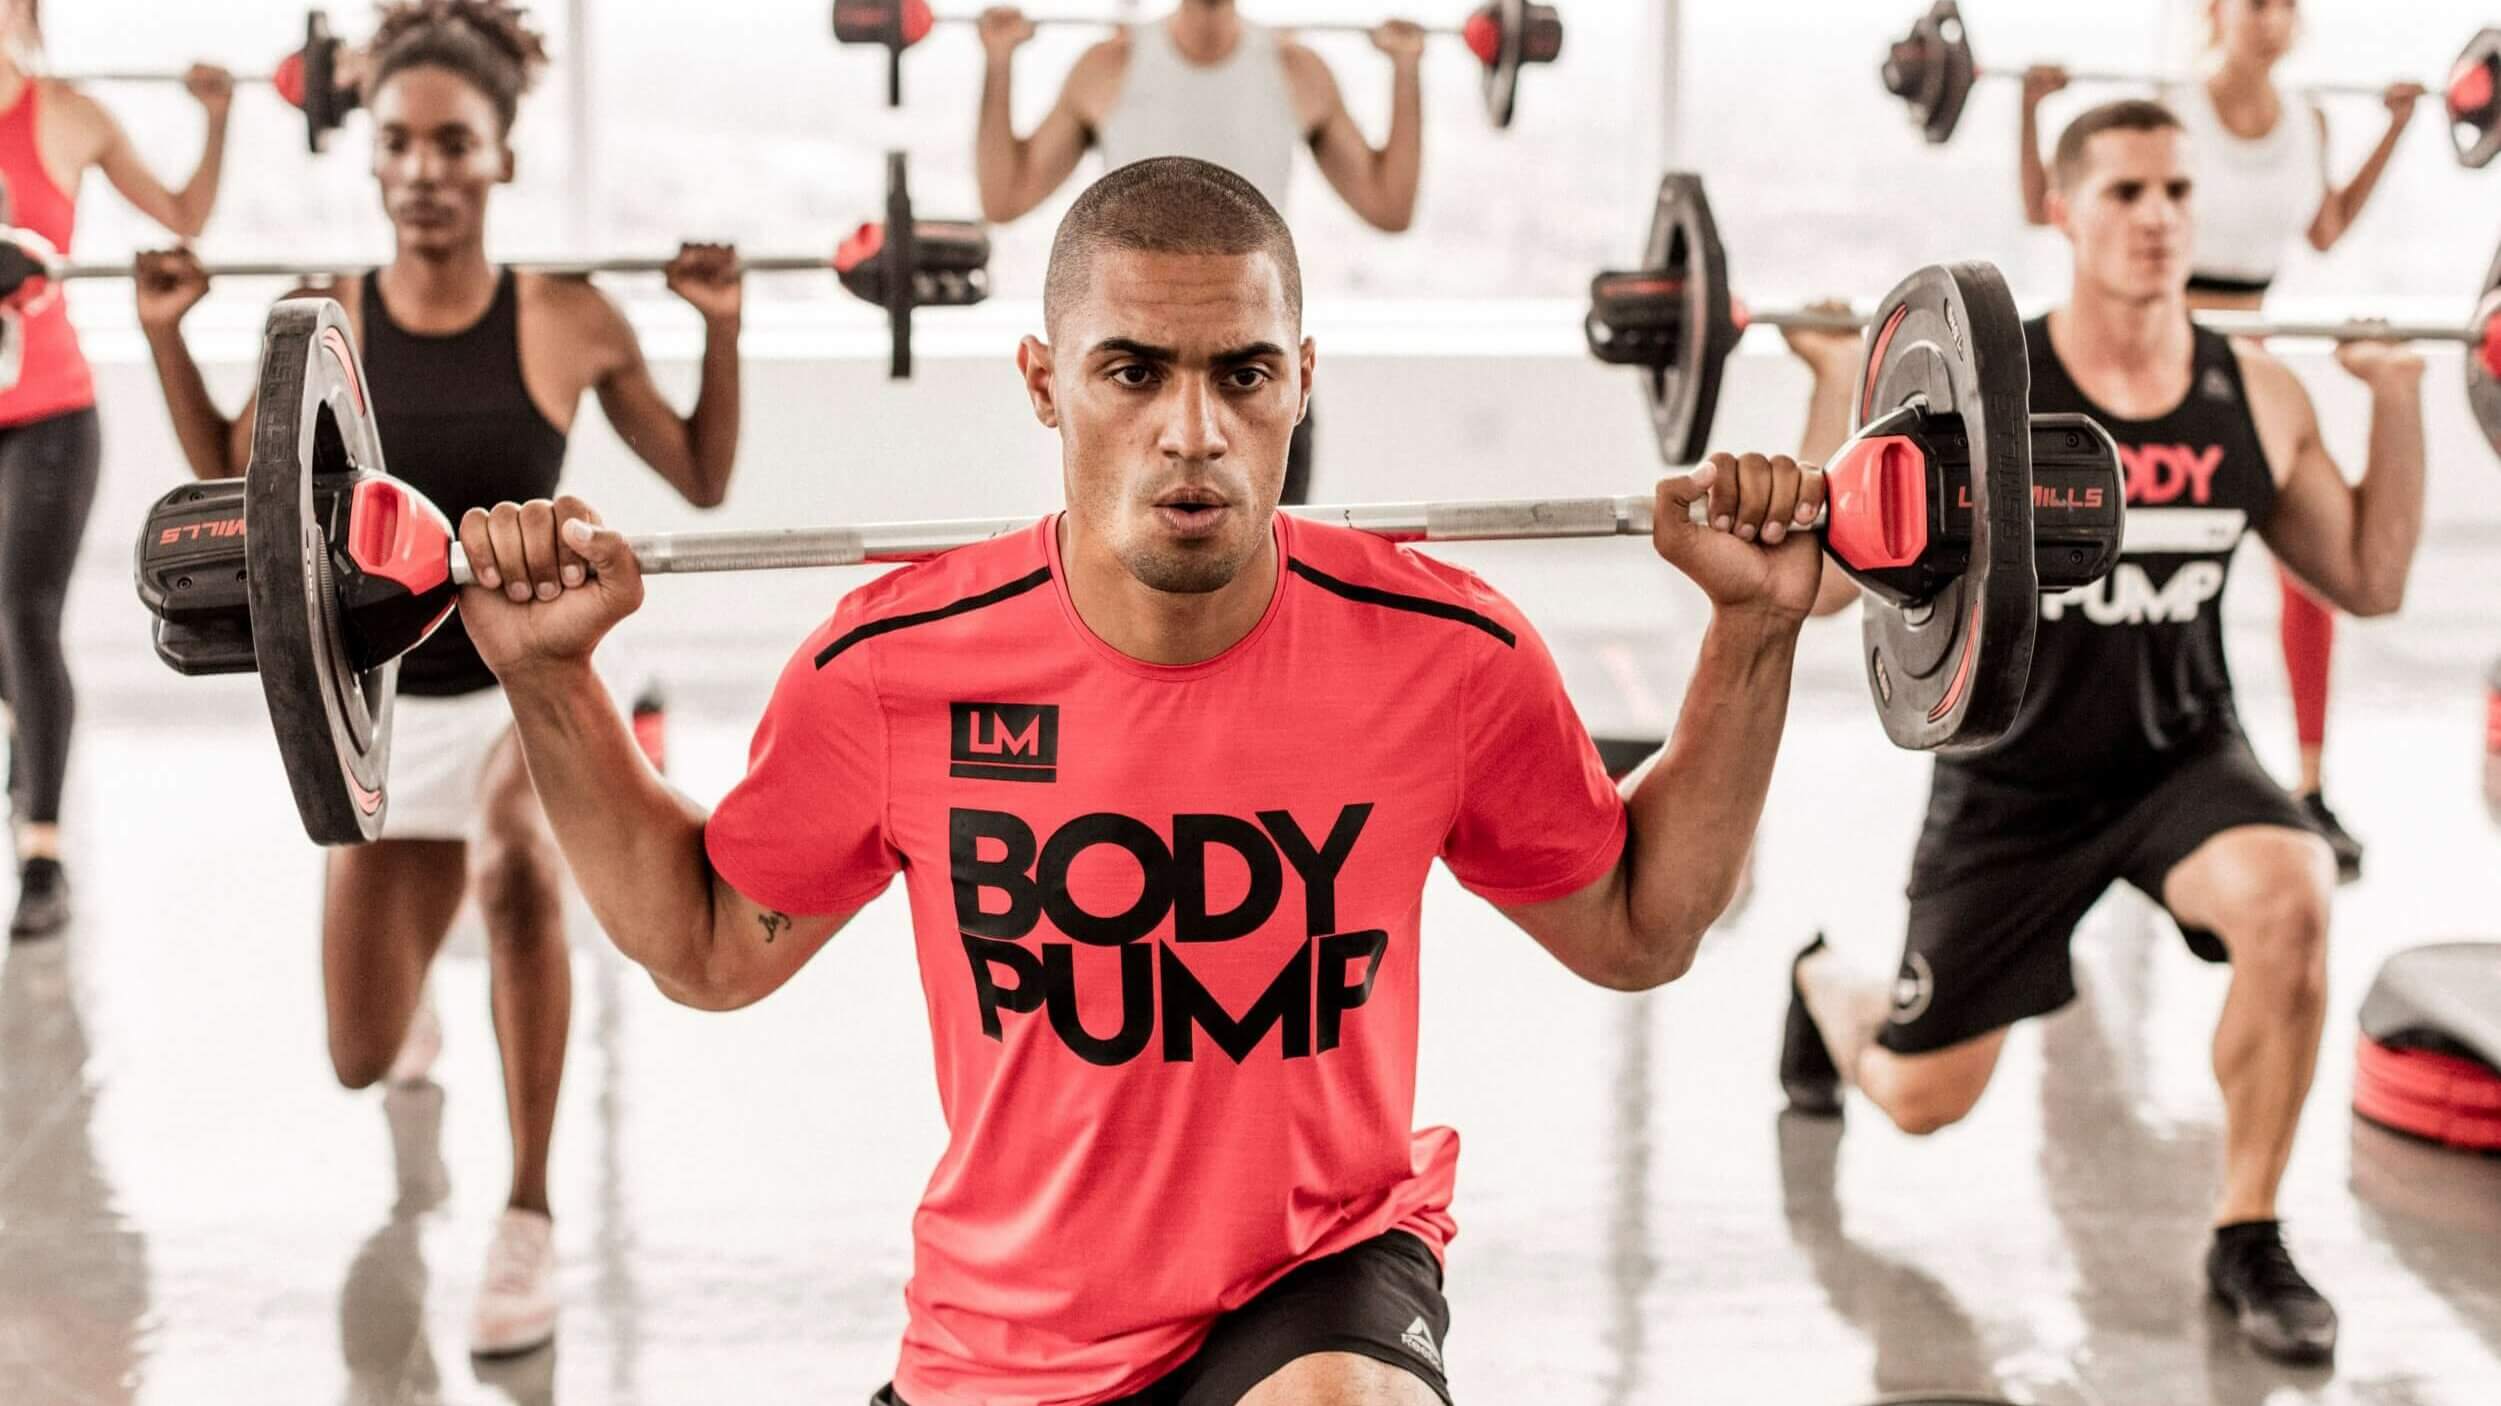 Man central with weights across shoulders. Les Mills - Body Pump.